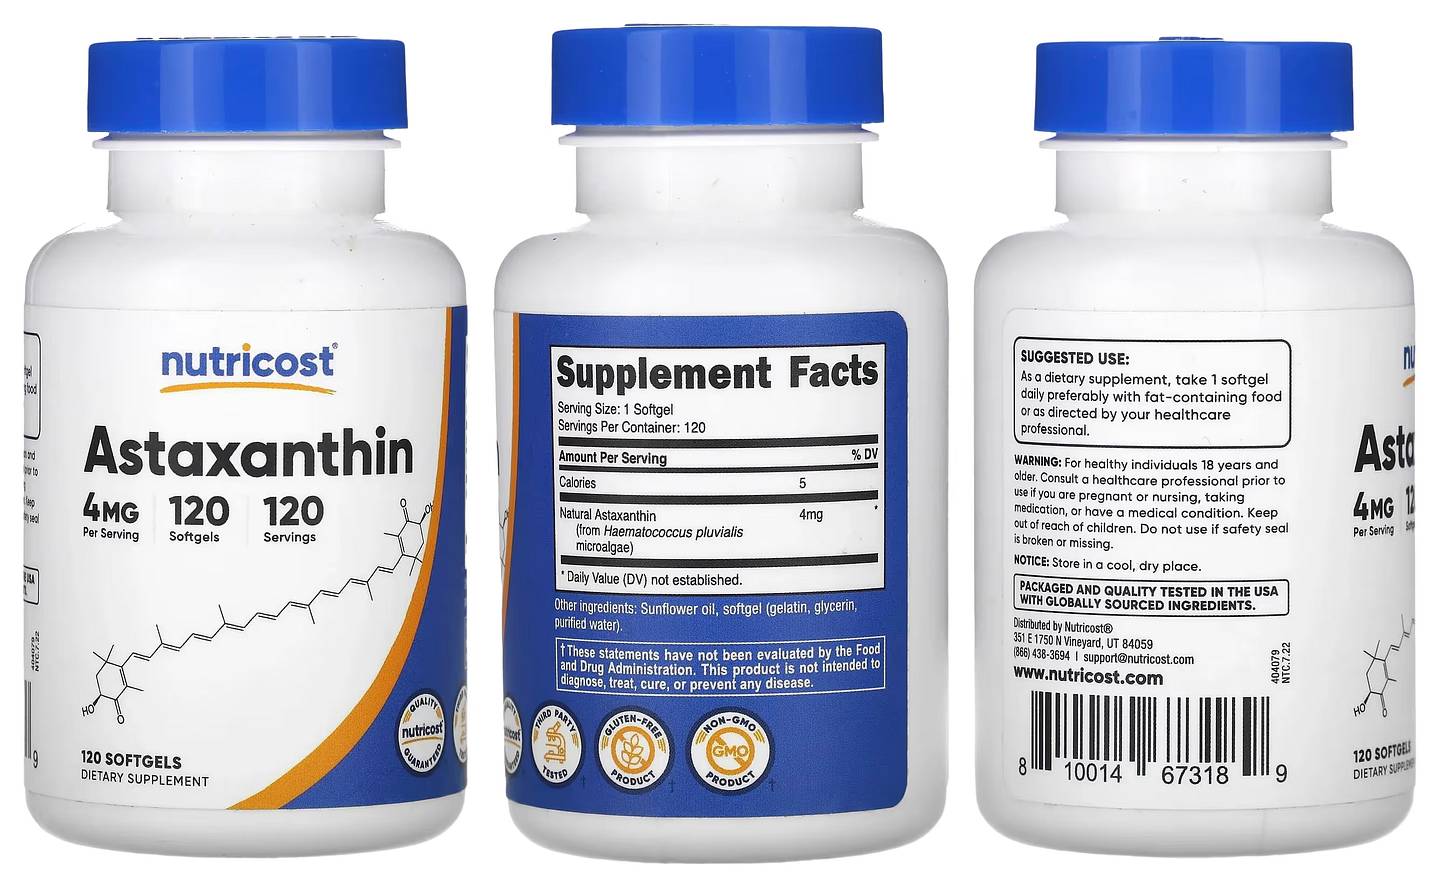 Nutricost, Astaxanthin packaging